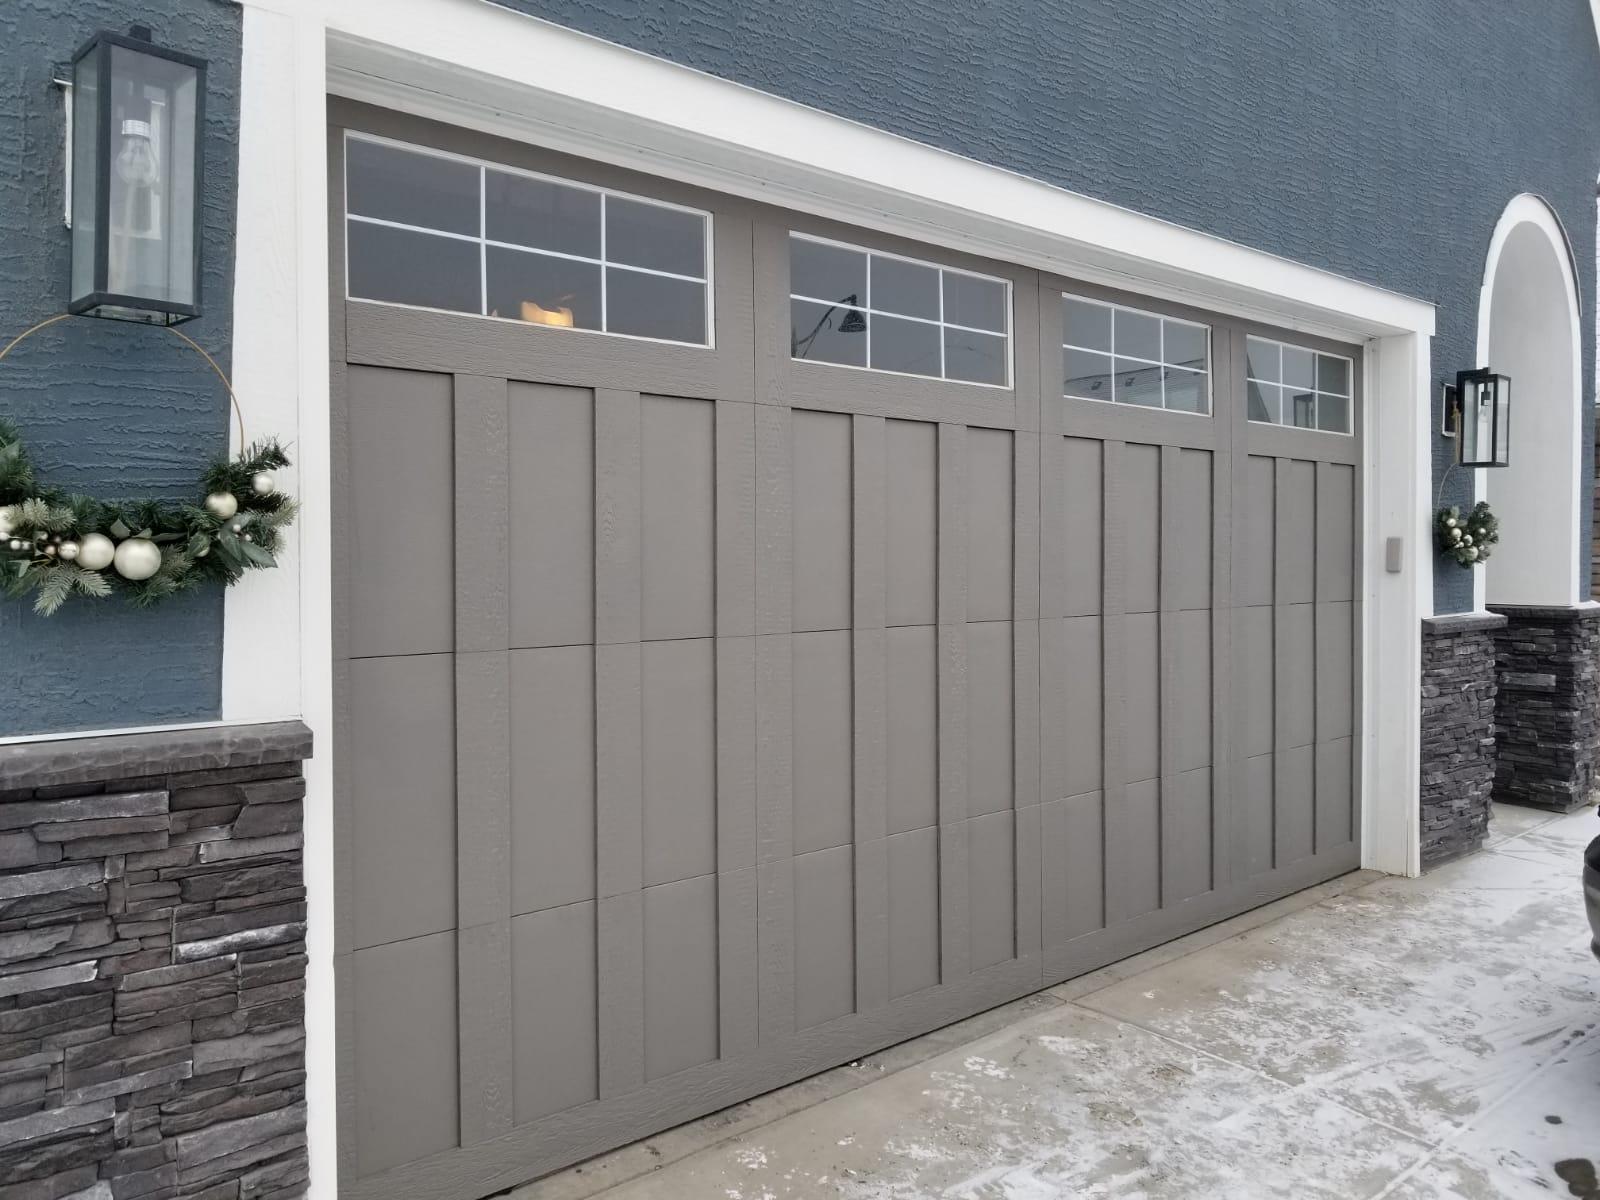 Why My Chamberlain Garage Door Opens By Itself and How to Fix It? Unraveling the Mystery